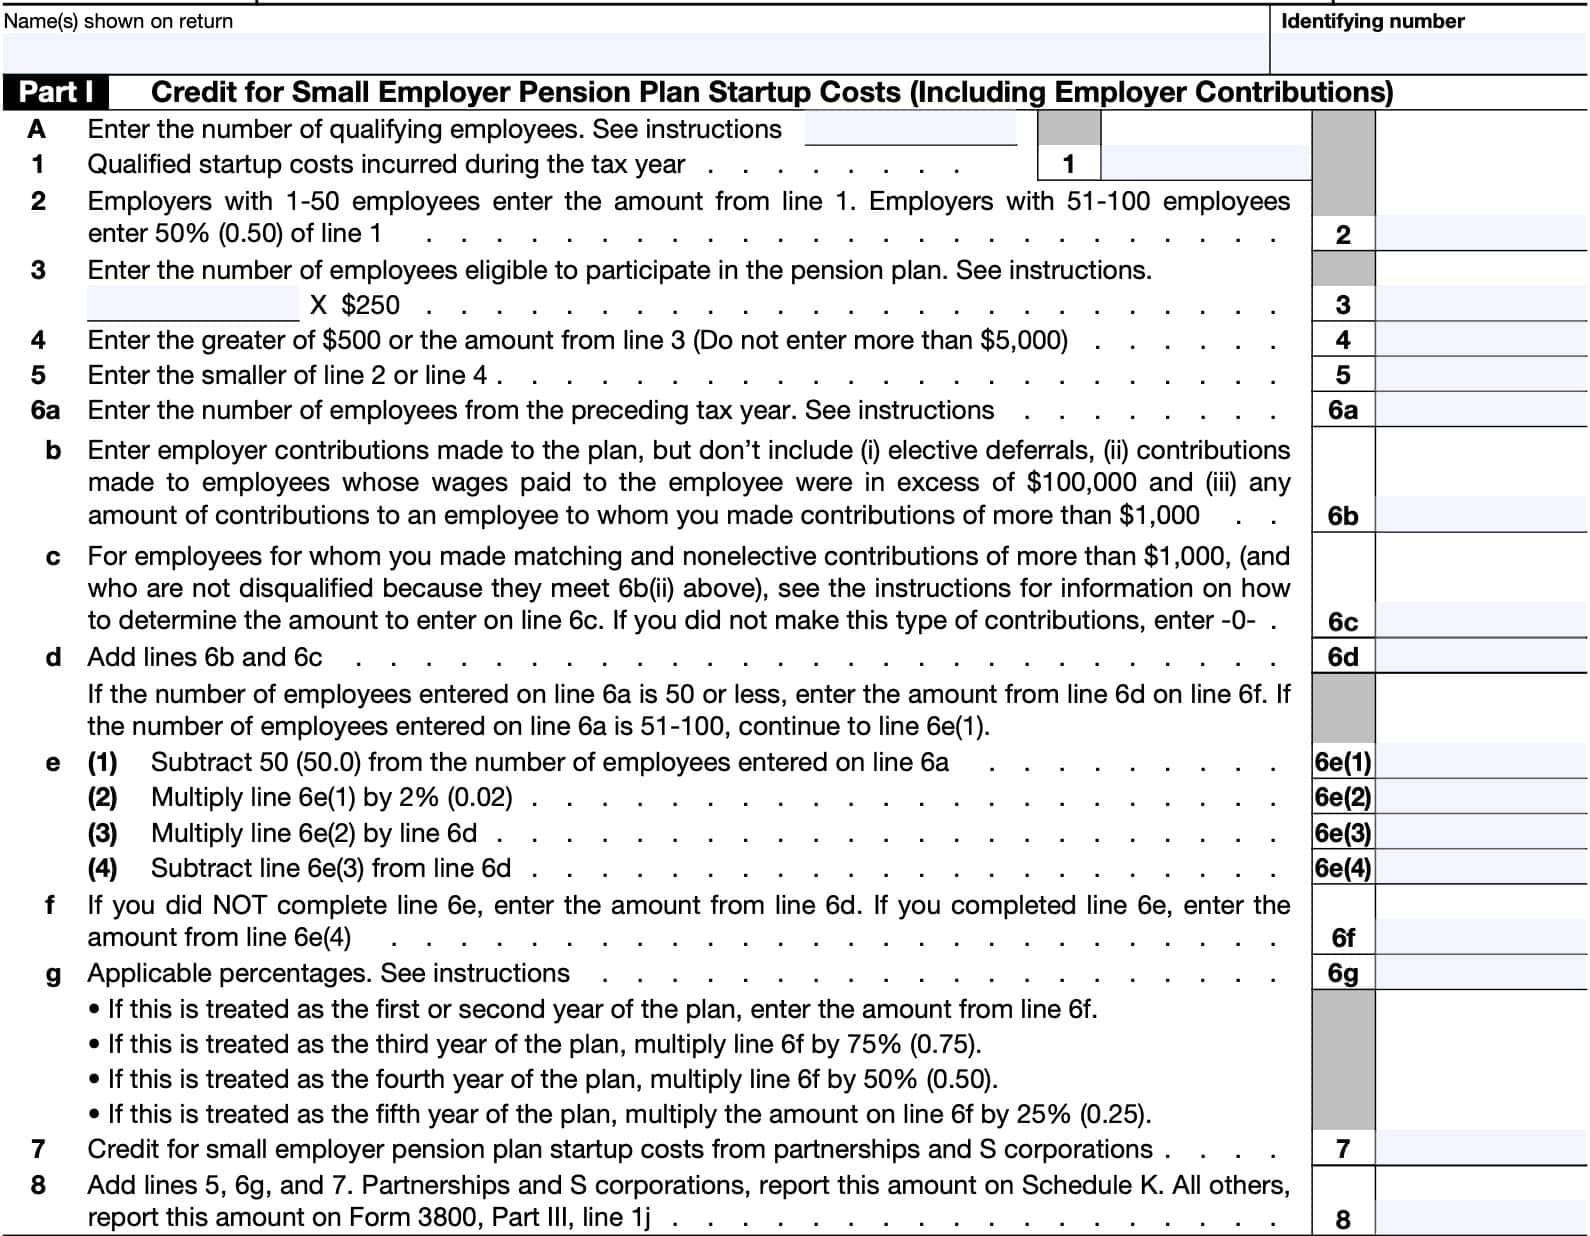 irs form 8881, part I: credit for small employer pension plan startup costs (including employer contributions)